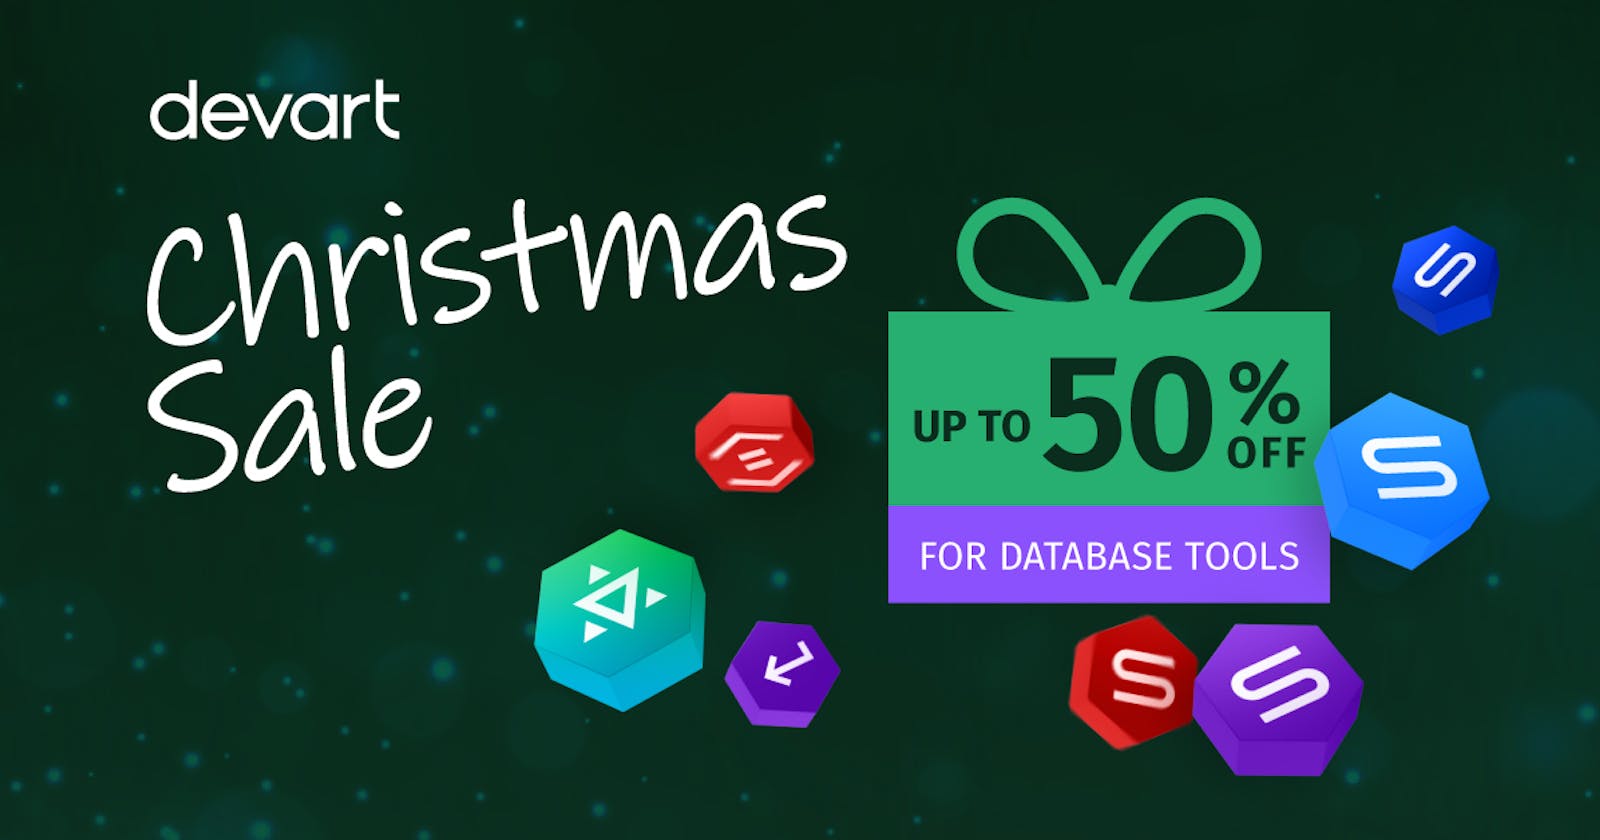 🎁 Celebrate Christmas with exclusive discounts on Devart database tools!